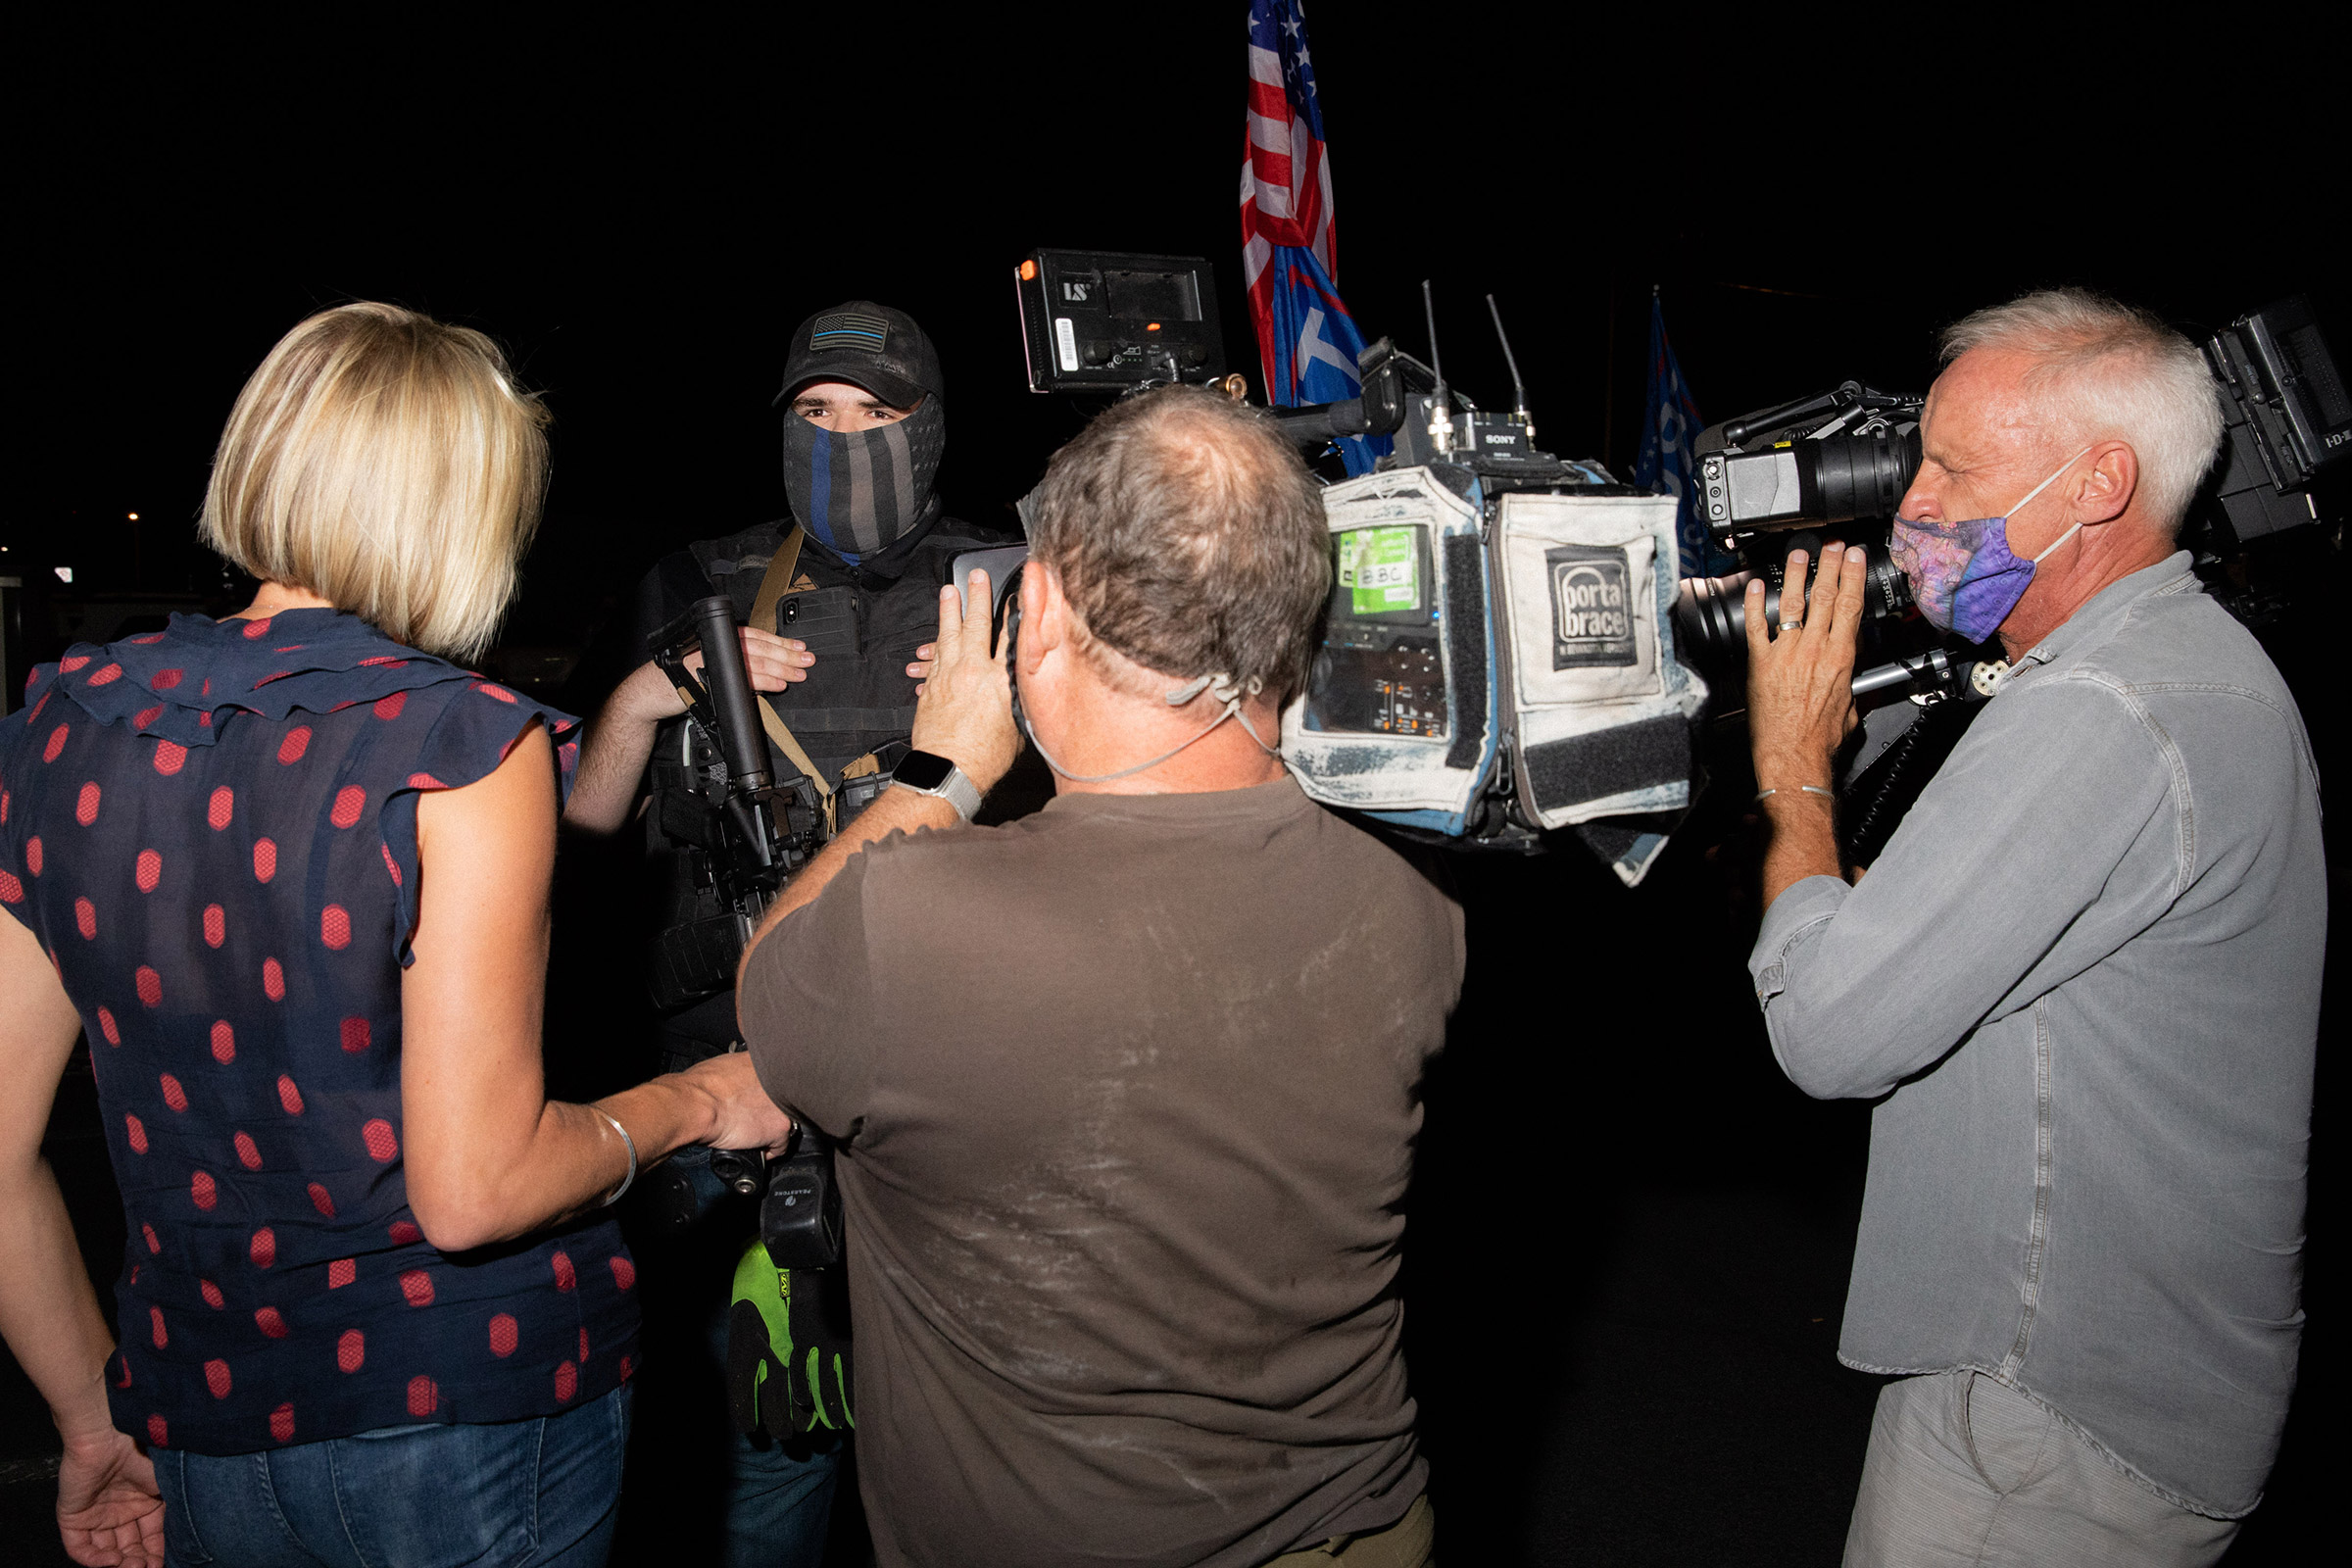 A member of a militia is flanked by cameras at the Maricopa County Elections Office in Phoenix, AZ on November 5, 2020